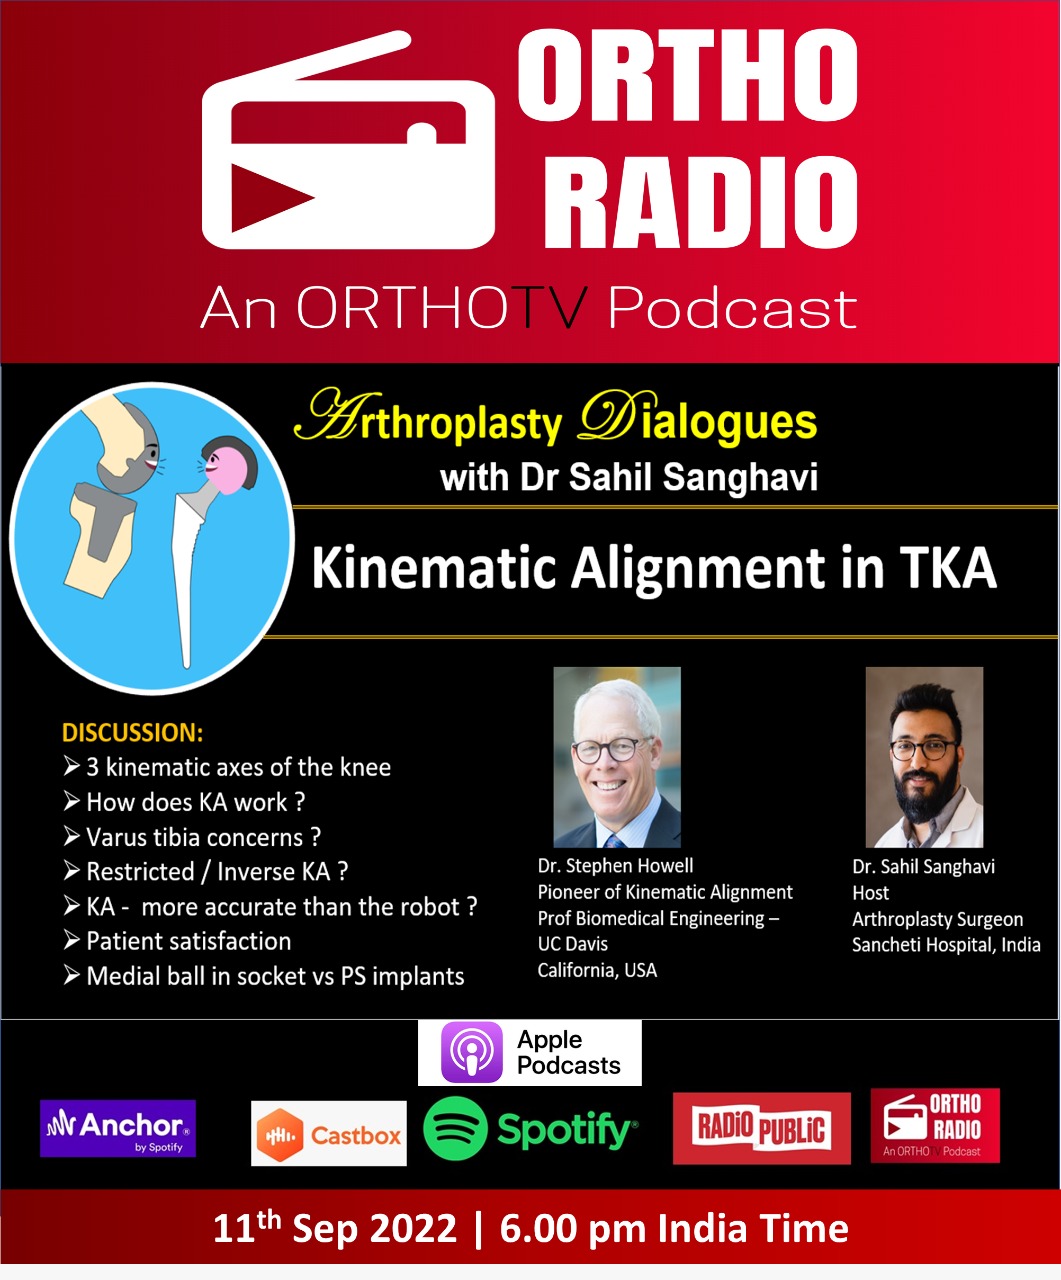 OrthoRADIO Arthroplasty Dialogues EPISODE 4: Kinematic Alignment in TKA : Dr. Stephen Howell & Dr Sahil Sanghvi